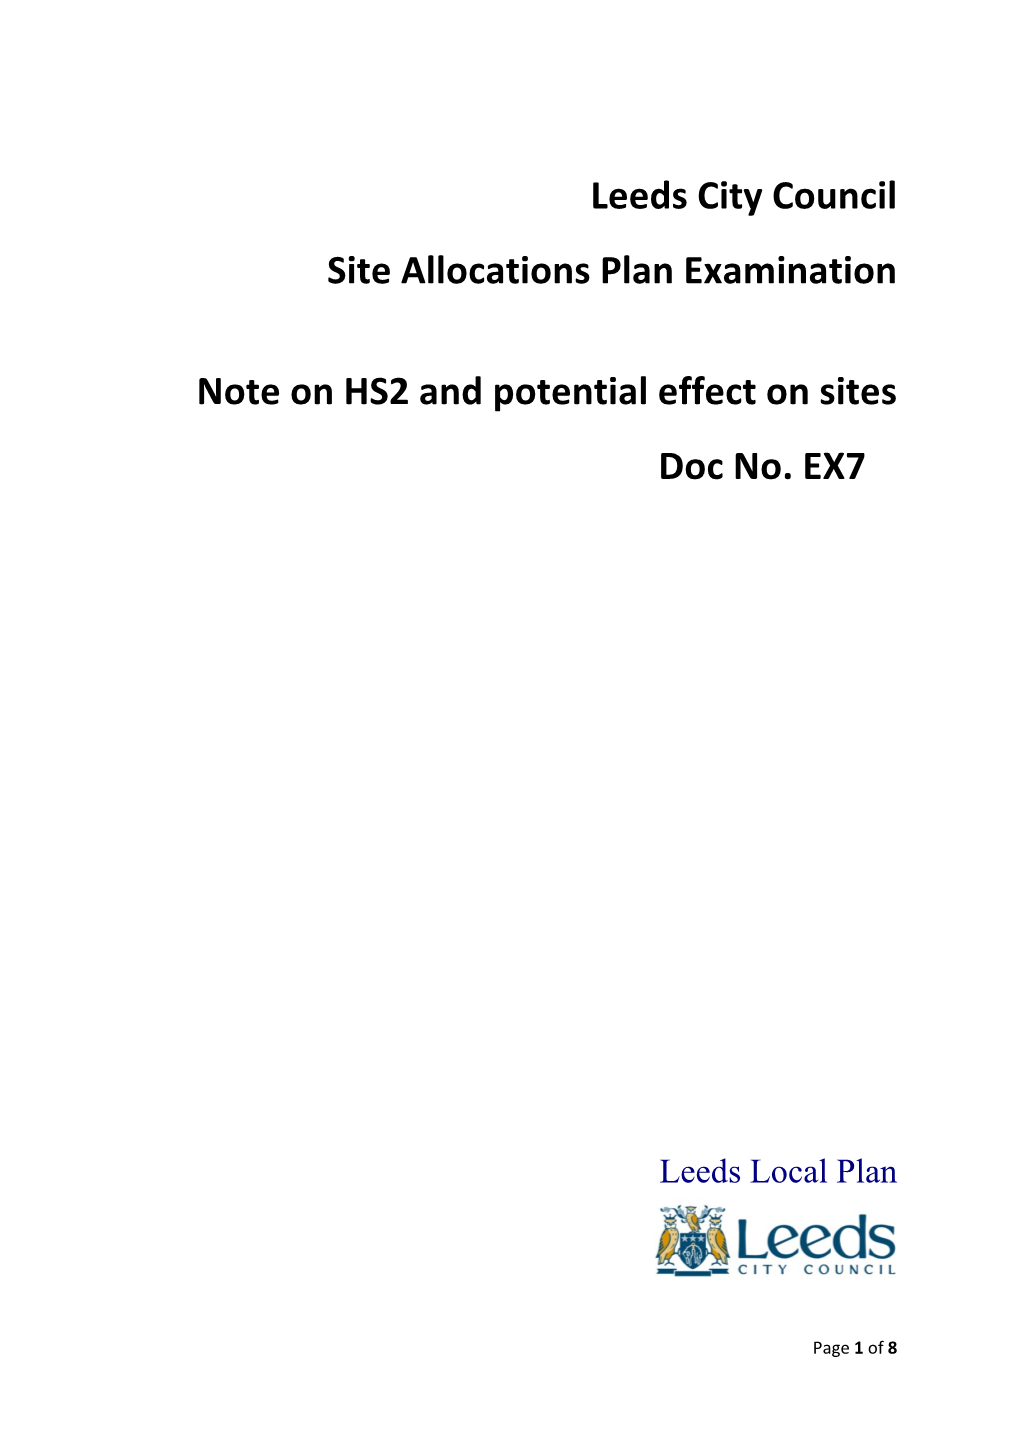 Leeds City Council Site Allocations Plan Examination Note on HS2 And